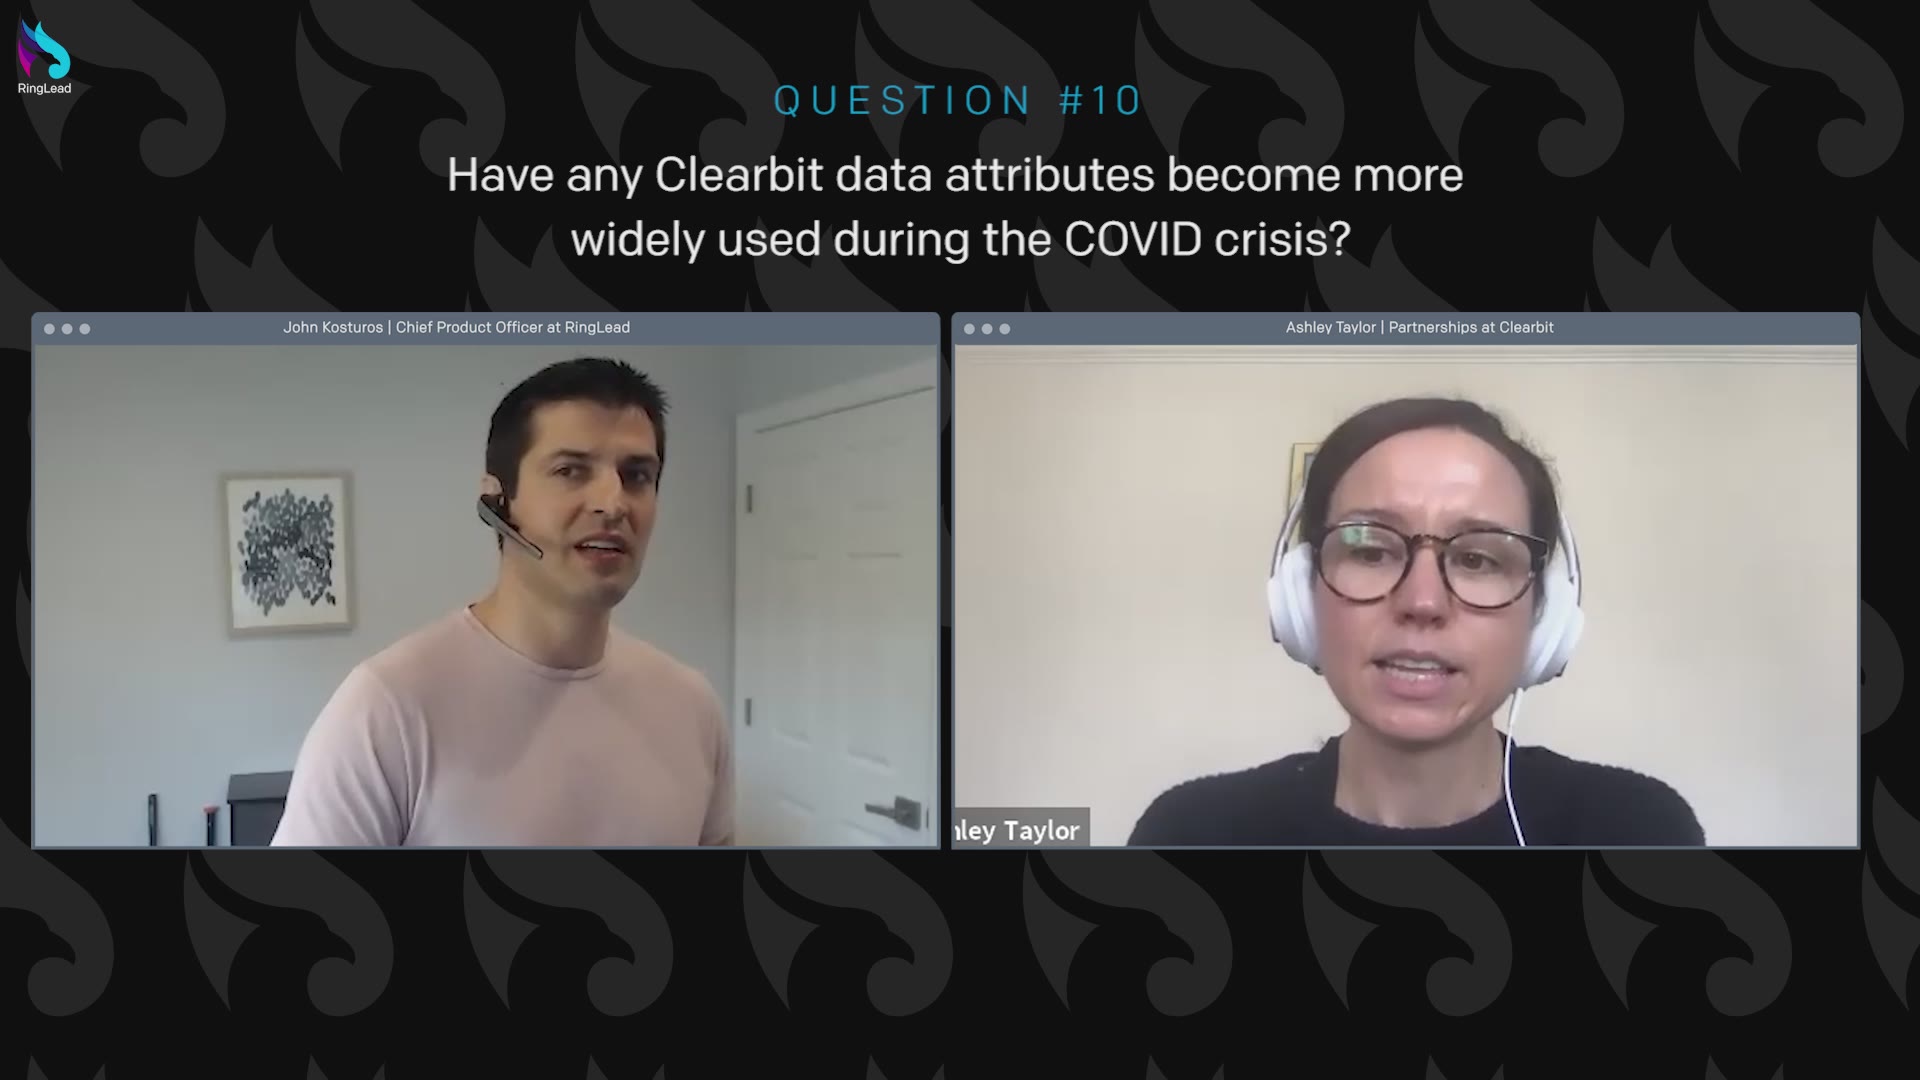 The Role of Data During COVID-19